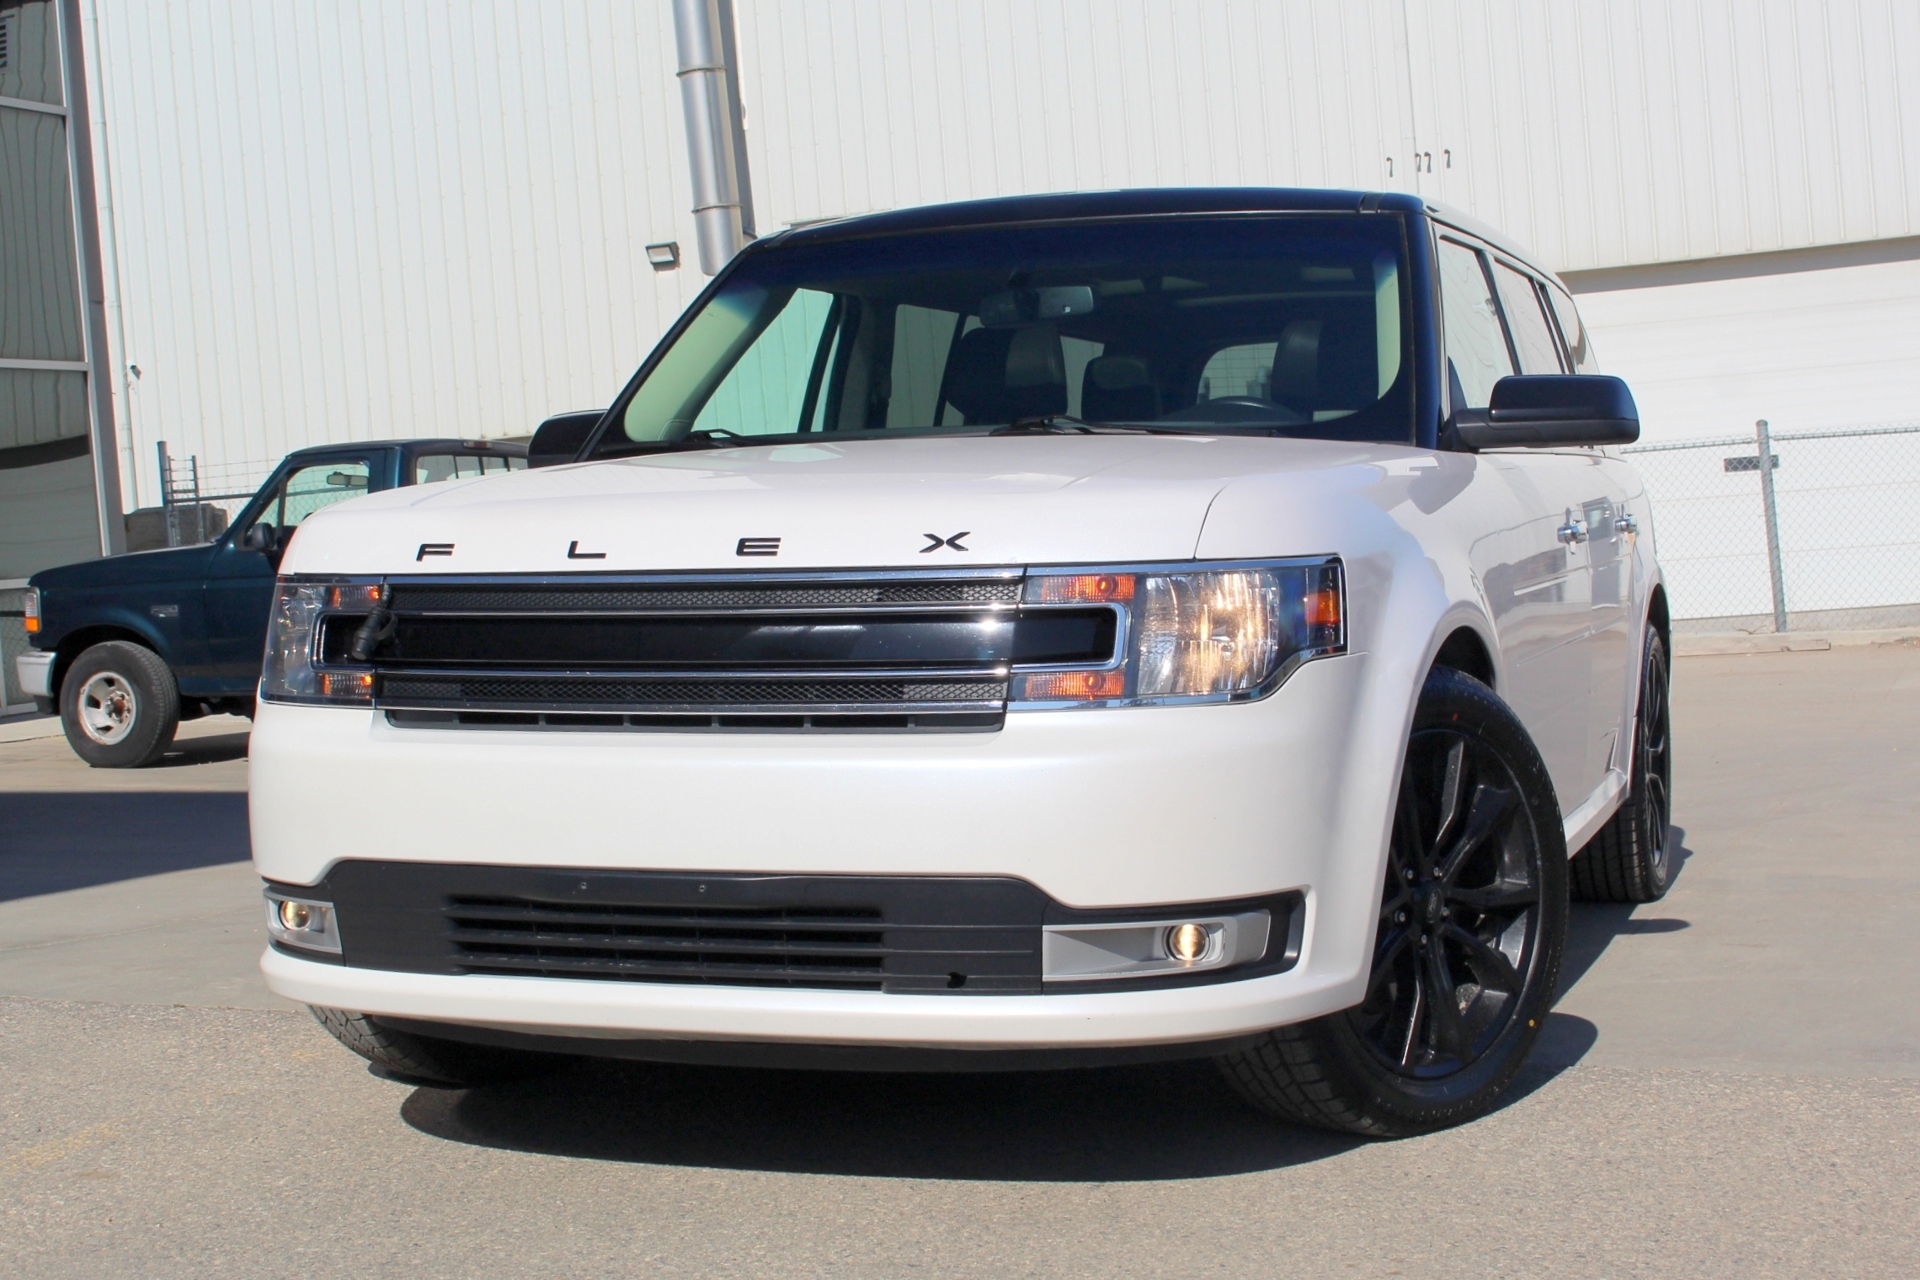 2019 Ford Flex SEL - AWD - BLACK PACKAGE - 202A - VISTA ROOF